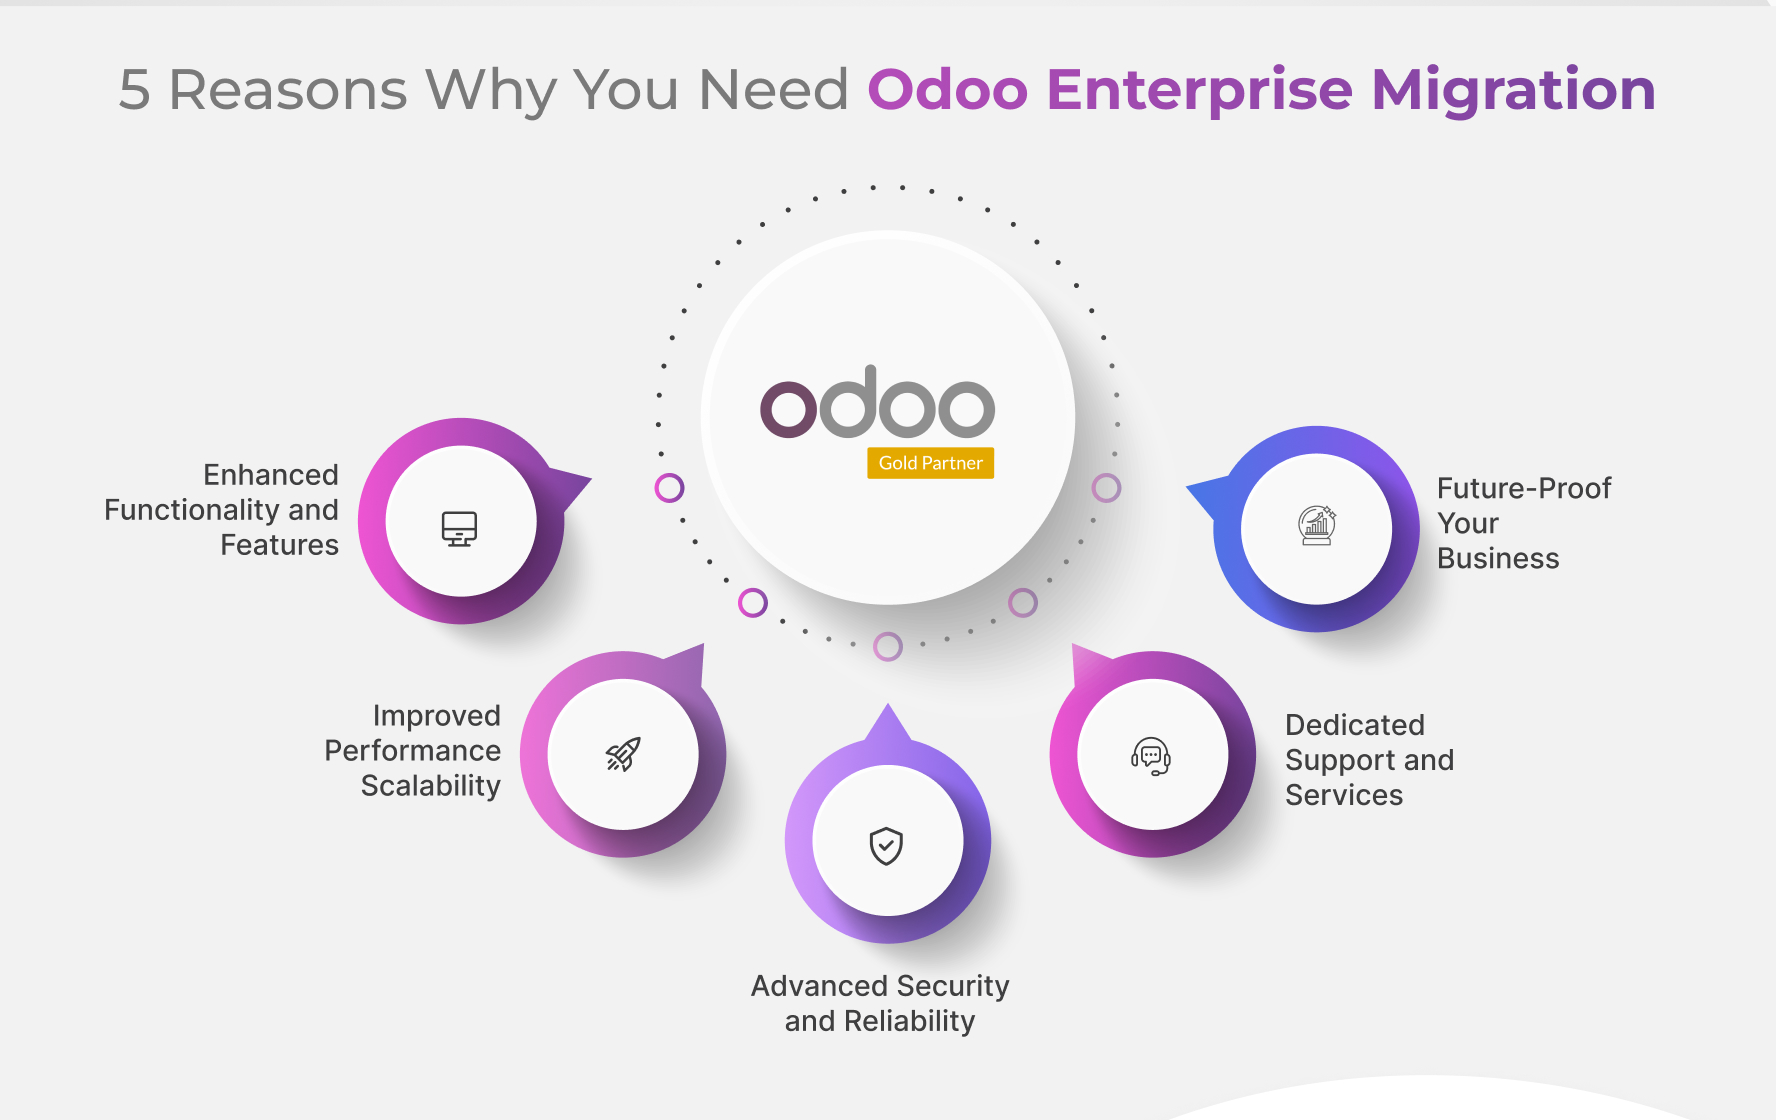 5 Reason for Odoo Migration